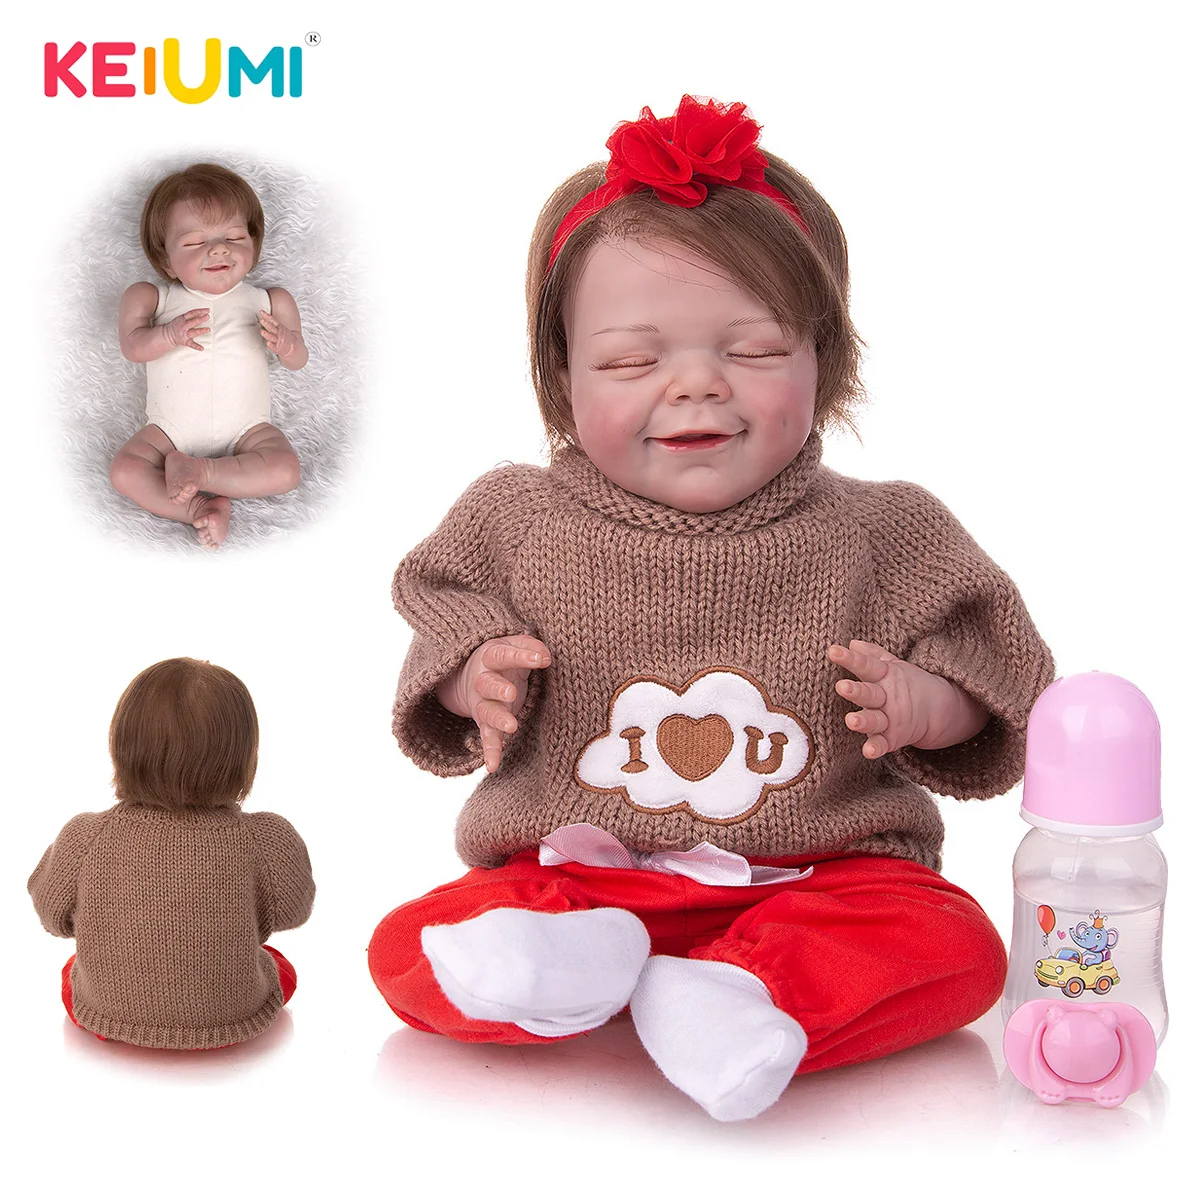 

KEIUMI 20 Inch Cute Closed Eyes Reborn Doll Soft Touch Well Packaged Alive Reborn Baby Doll For Children's Toys